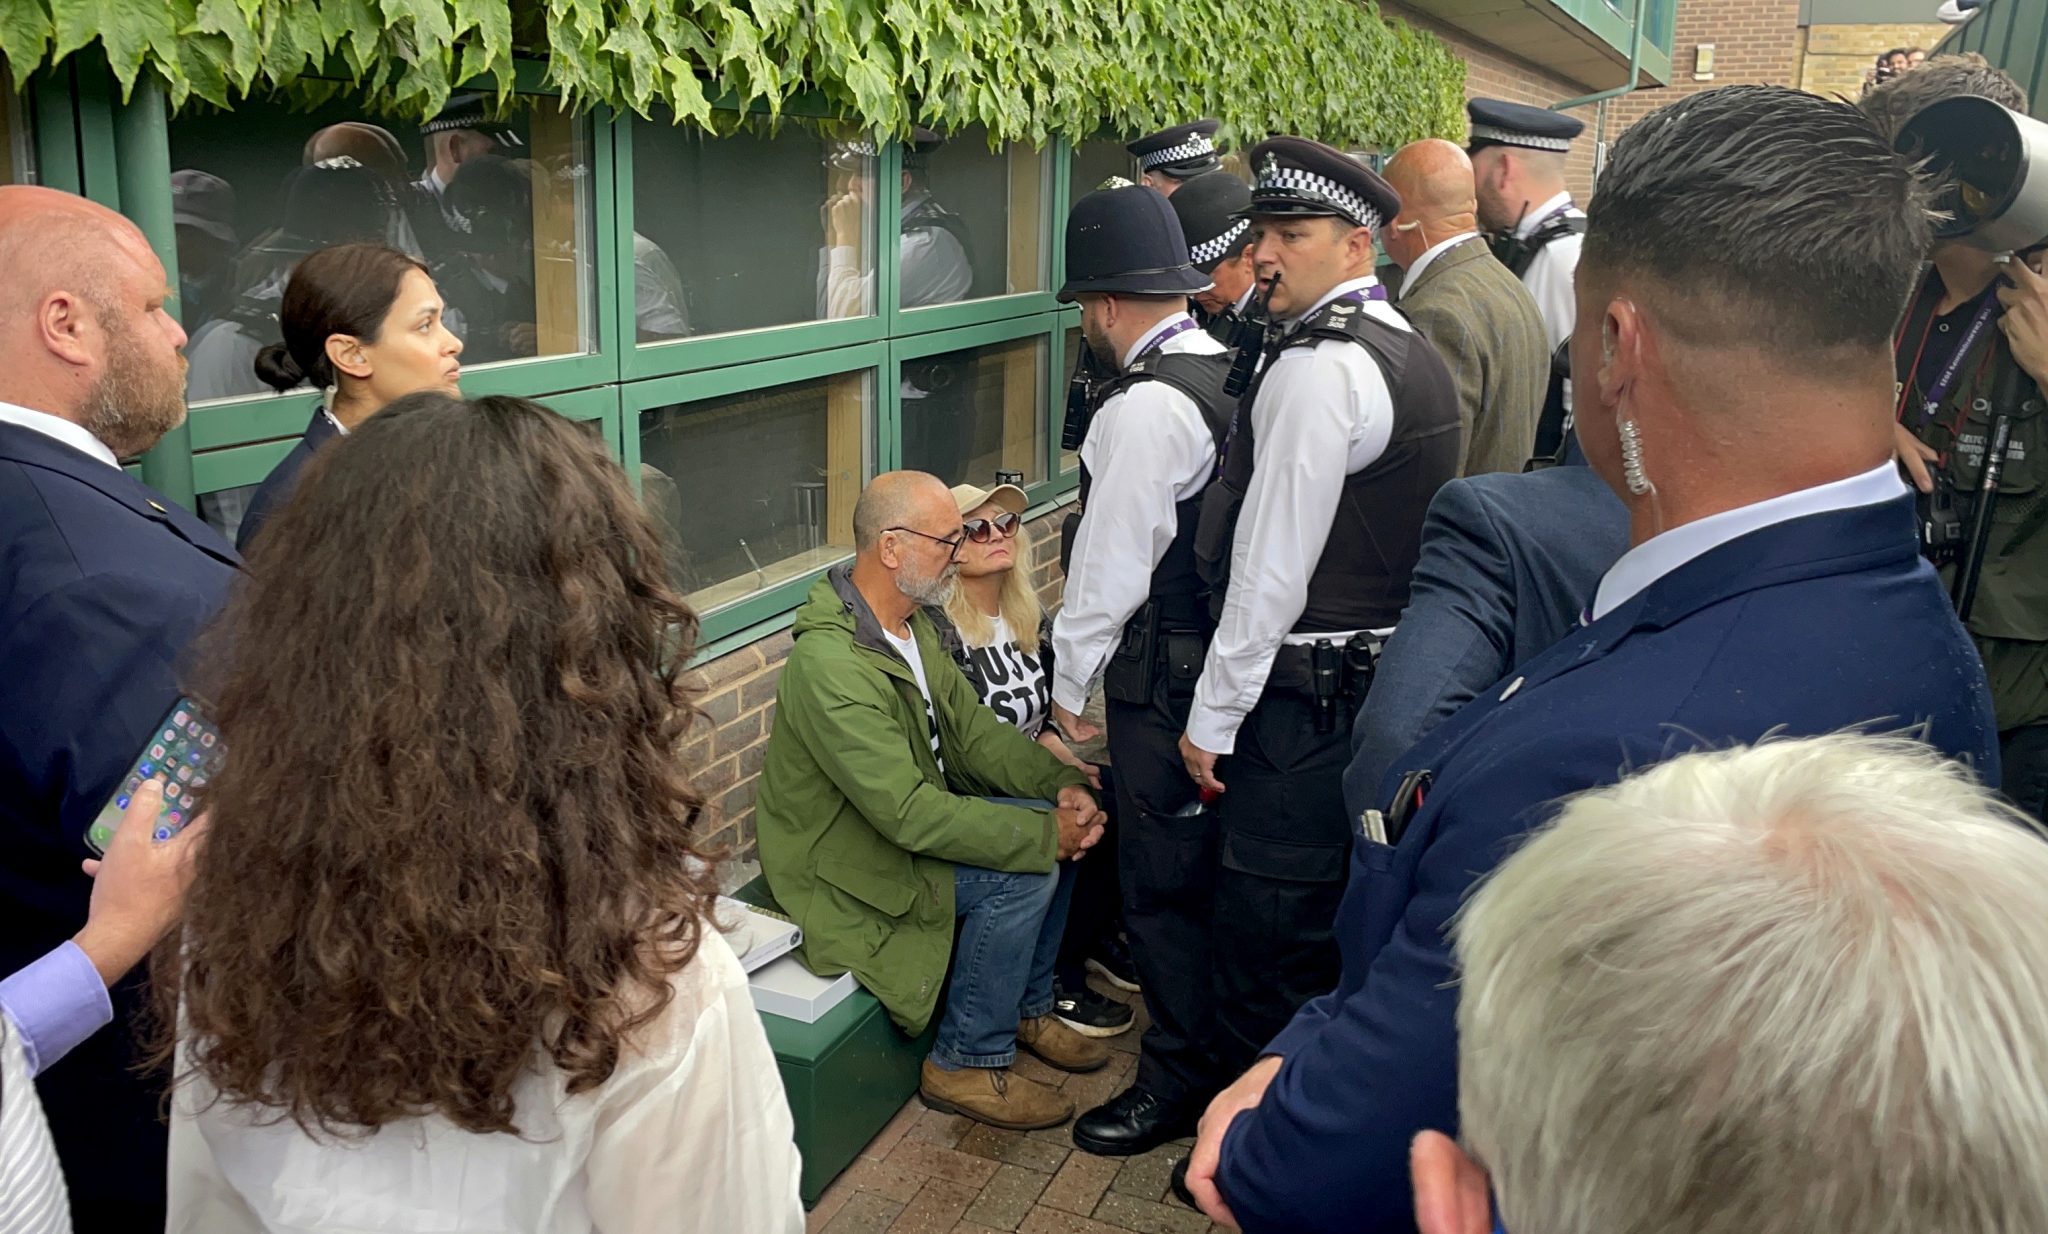 Just Stop Oil protesters disrupt play at Wimbledon